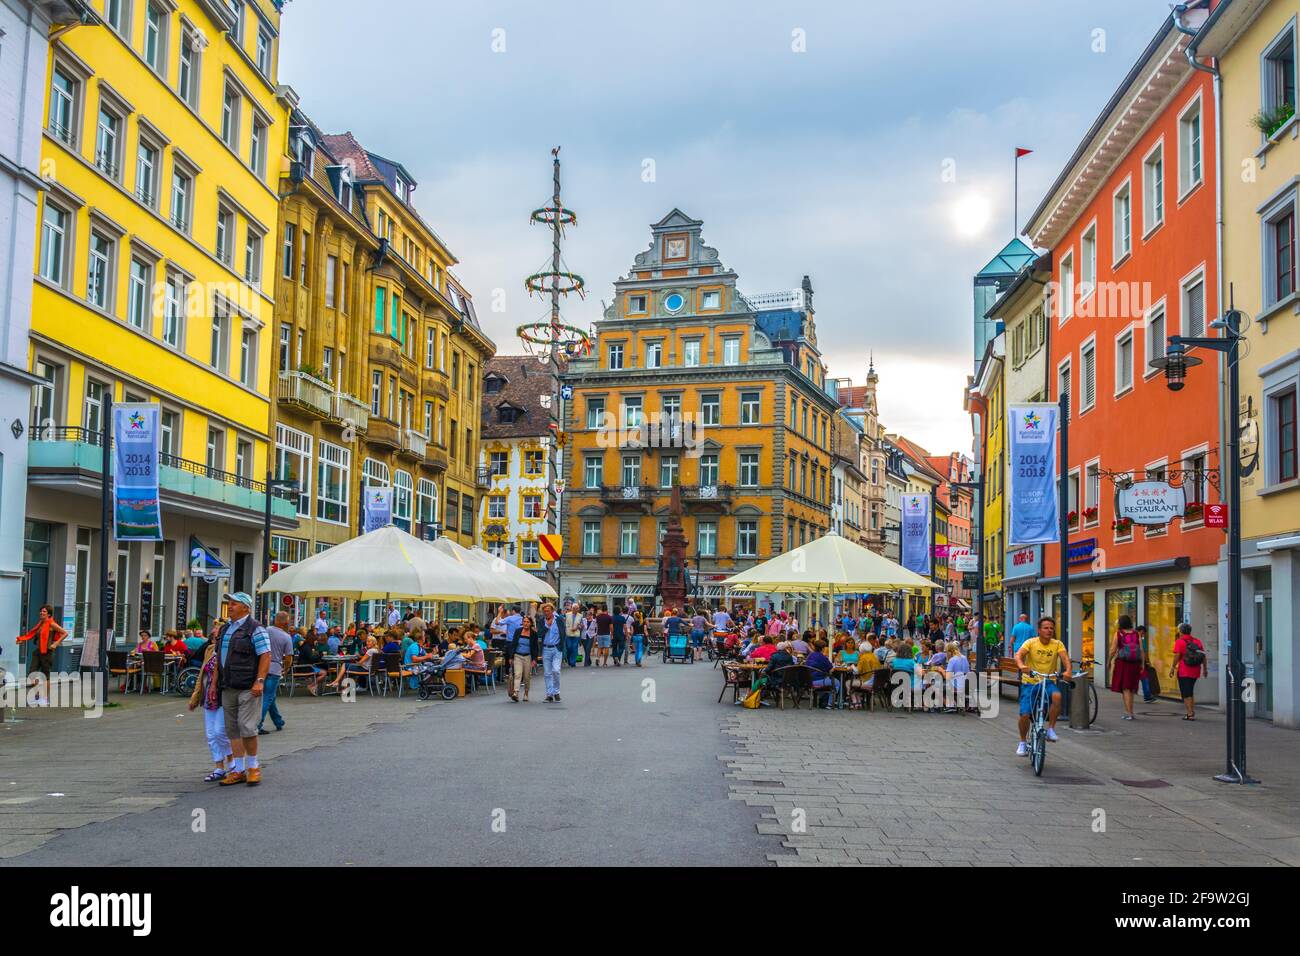 KONSTANZ, GERMANY, JULY 23, 2016: View of the markstatte square with famous kaiserbrunnen fountain in Konstanz in Germany. Stock Photo